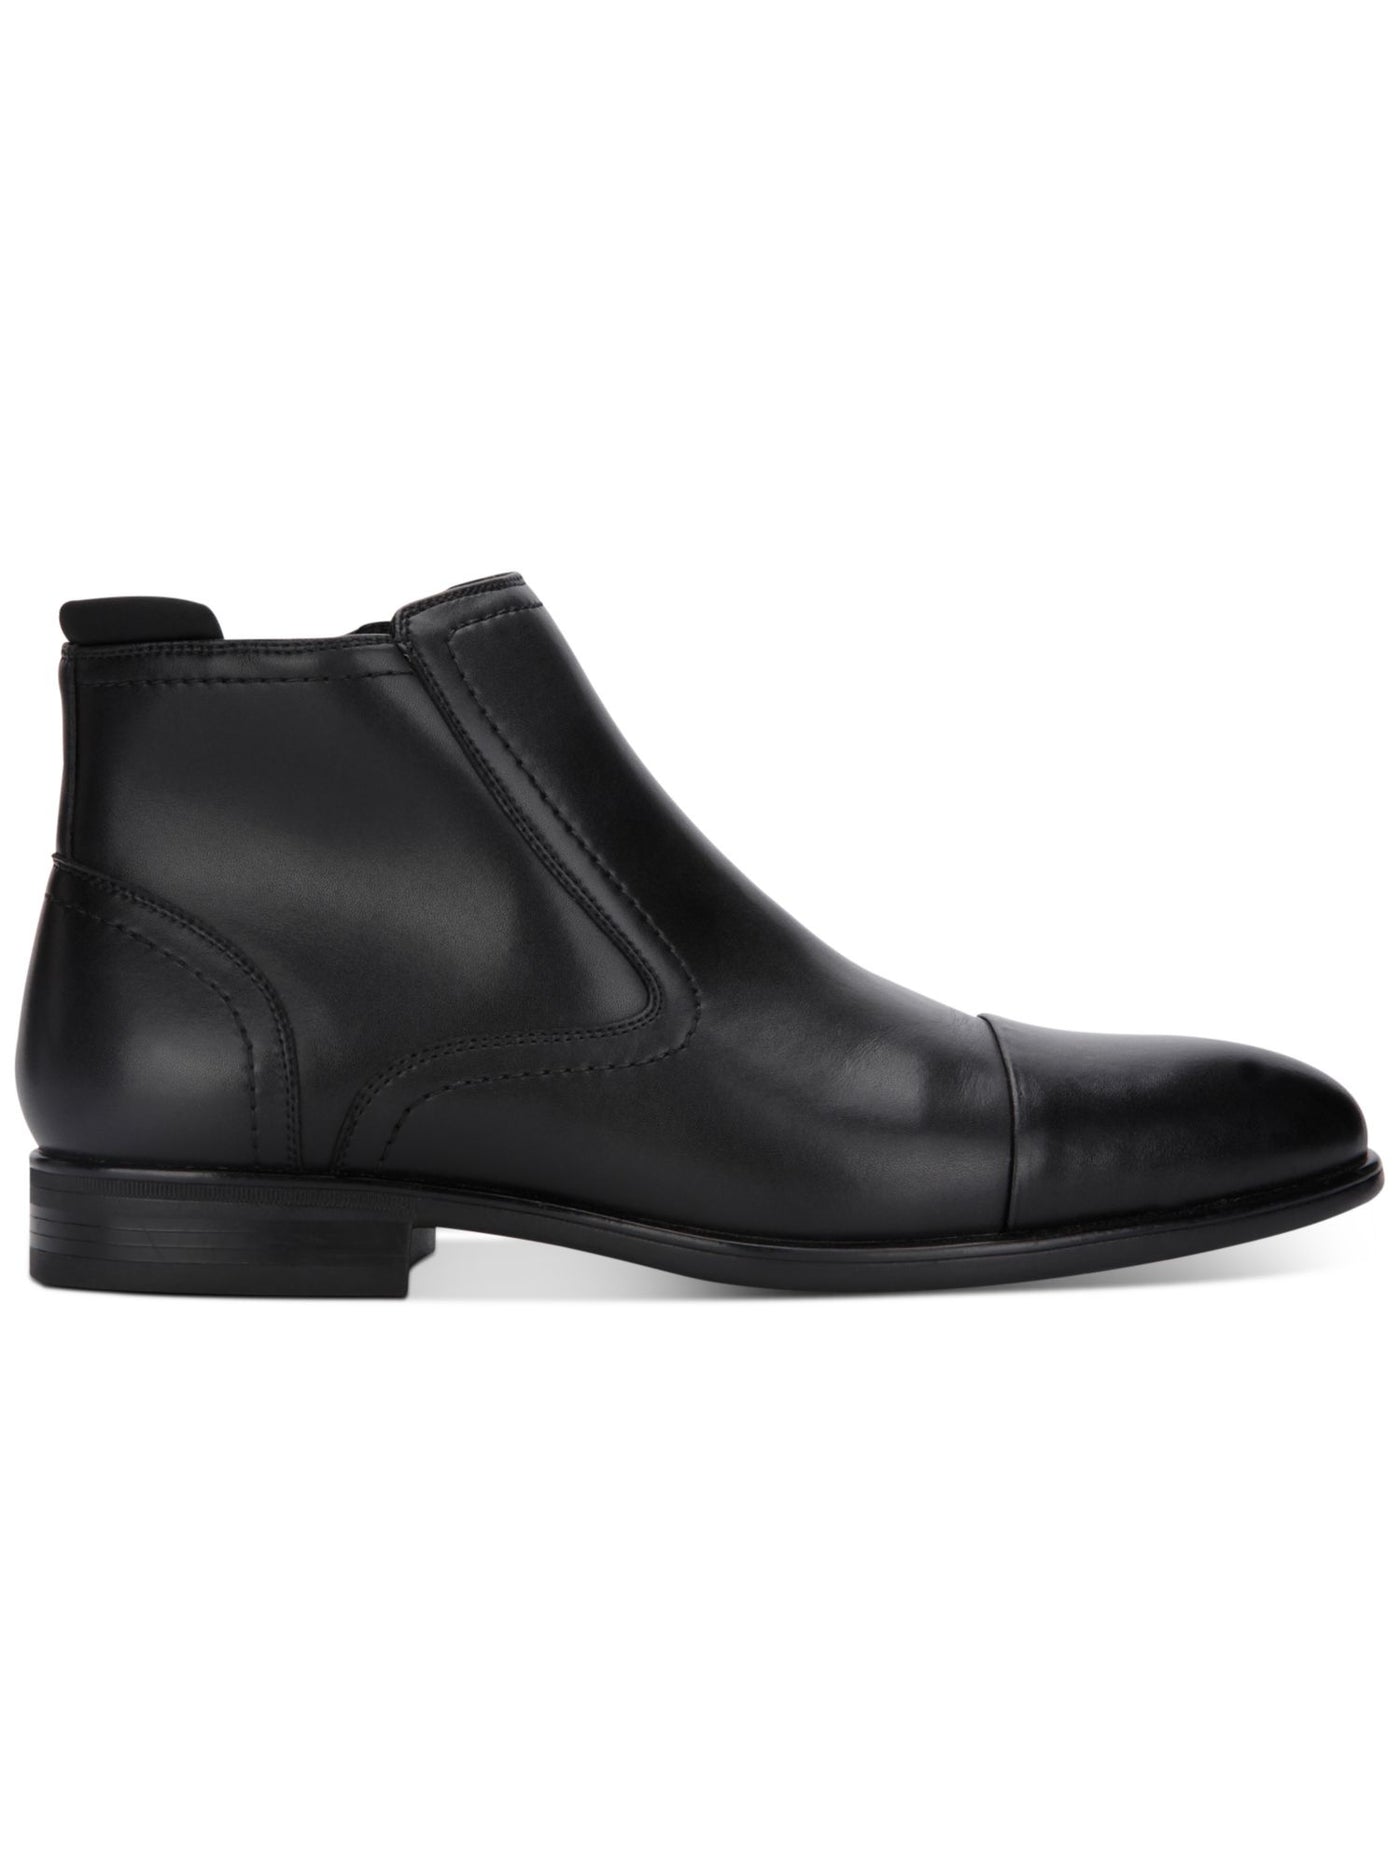 REACTION KENNETH COLE Mens Black Western Inspired Seaming Padded Edge Cap Toe Block Heel Zip-Up Boots Shoes 12 M